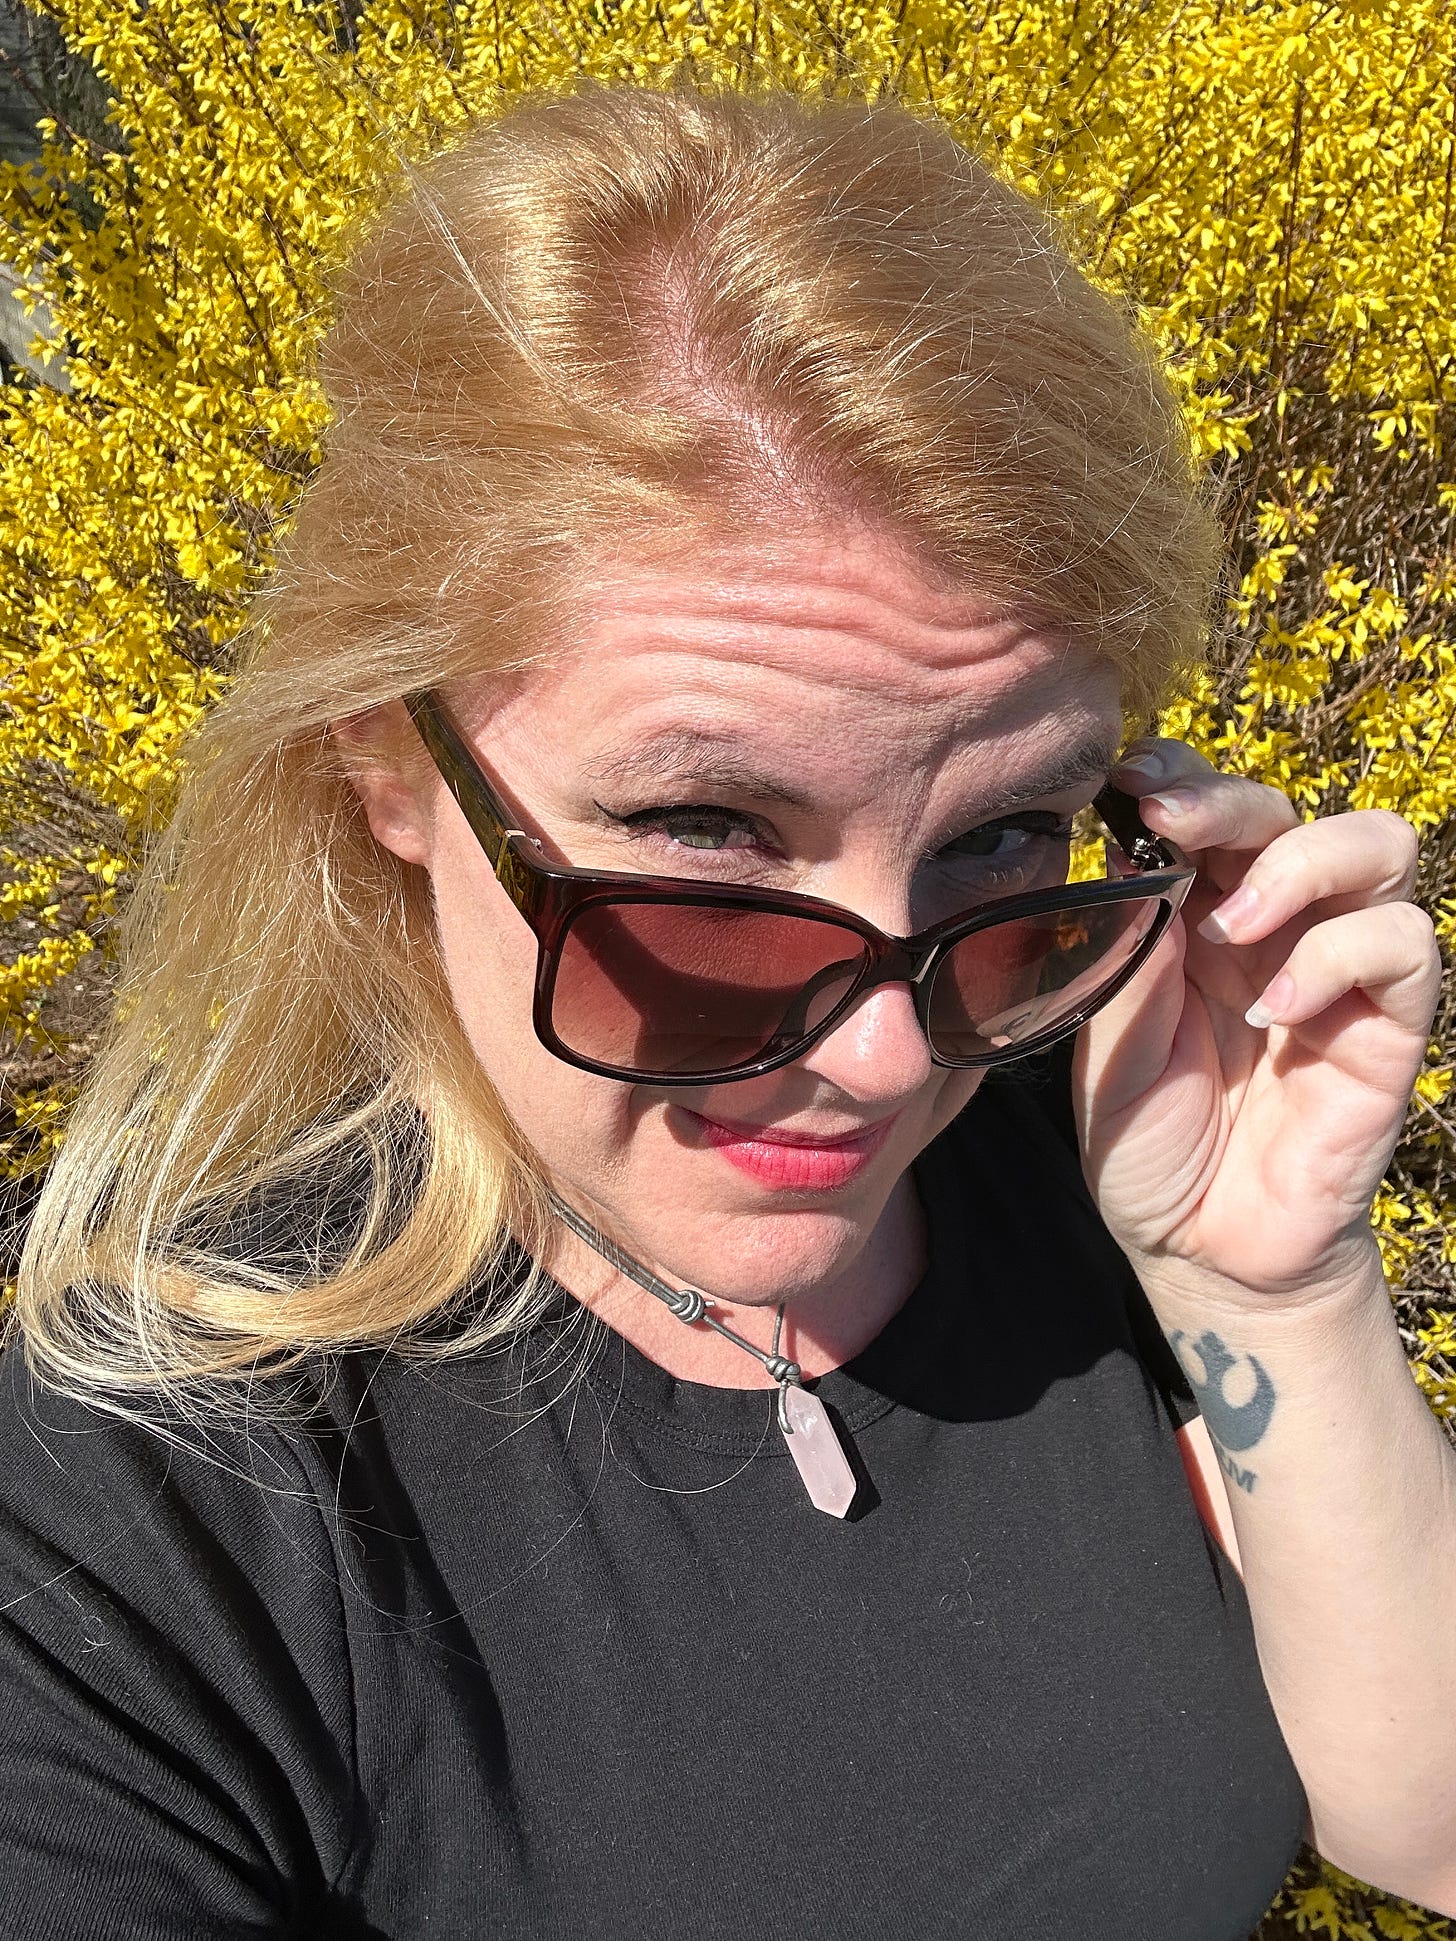 Cass in front of a field of forsythia, tipping her sunglasses down while looking at the camera